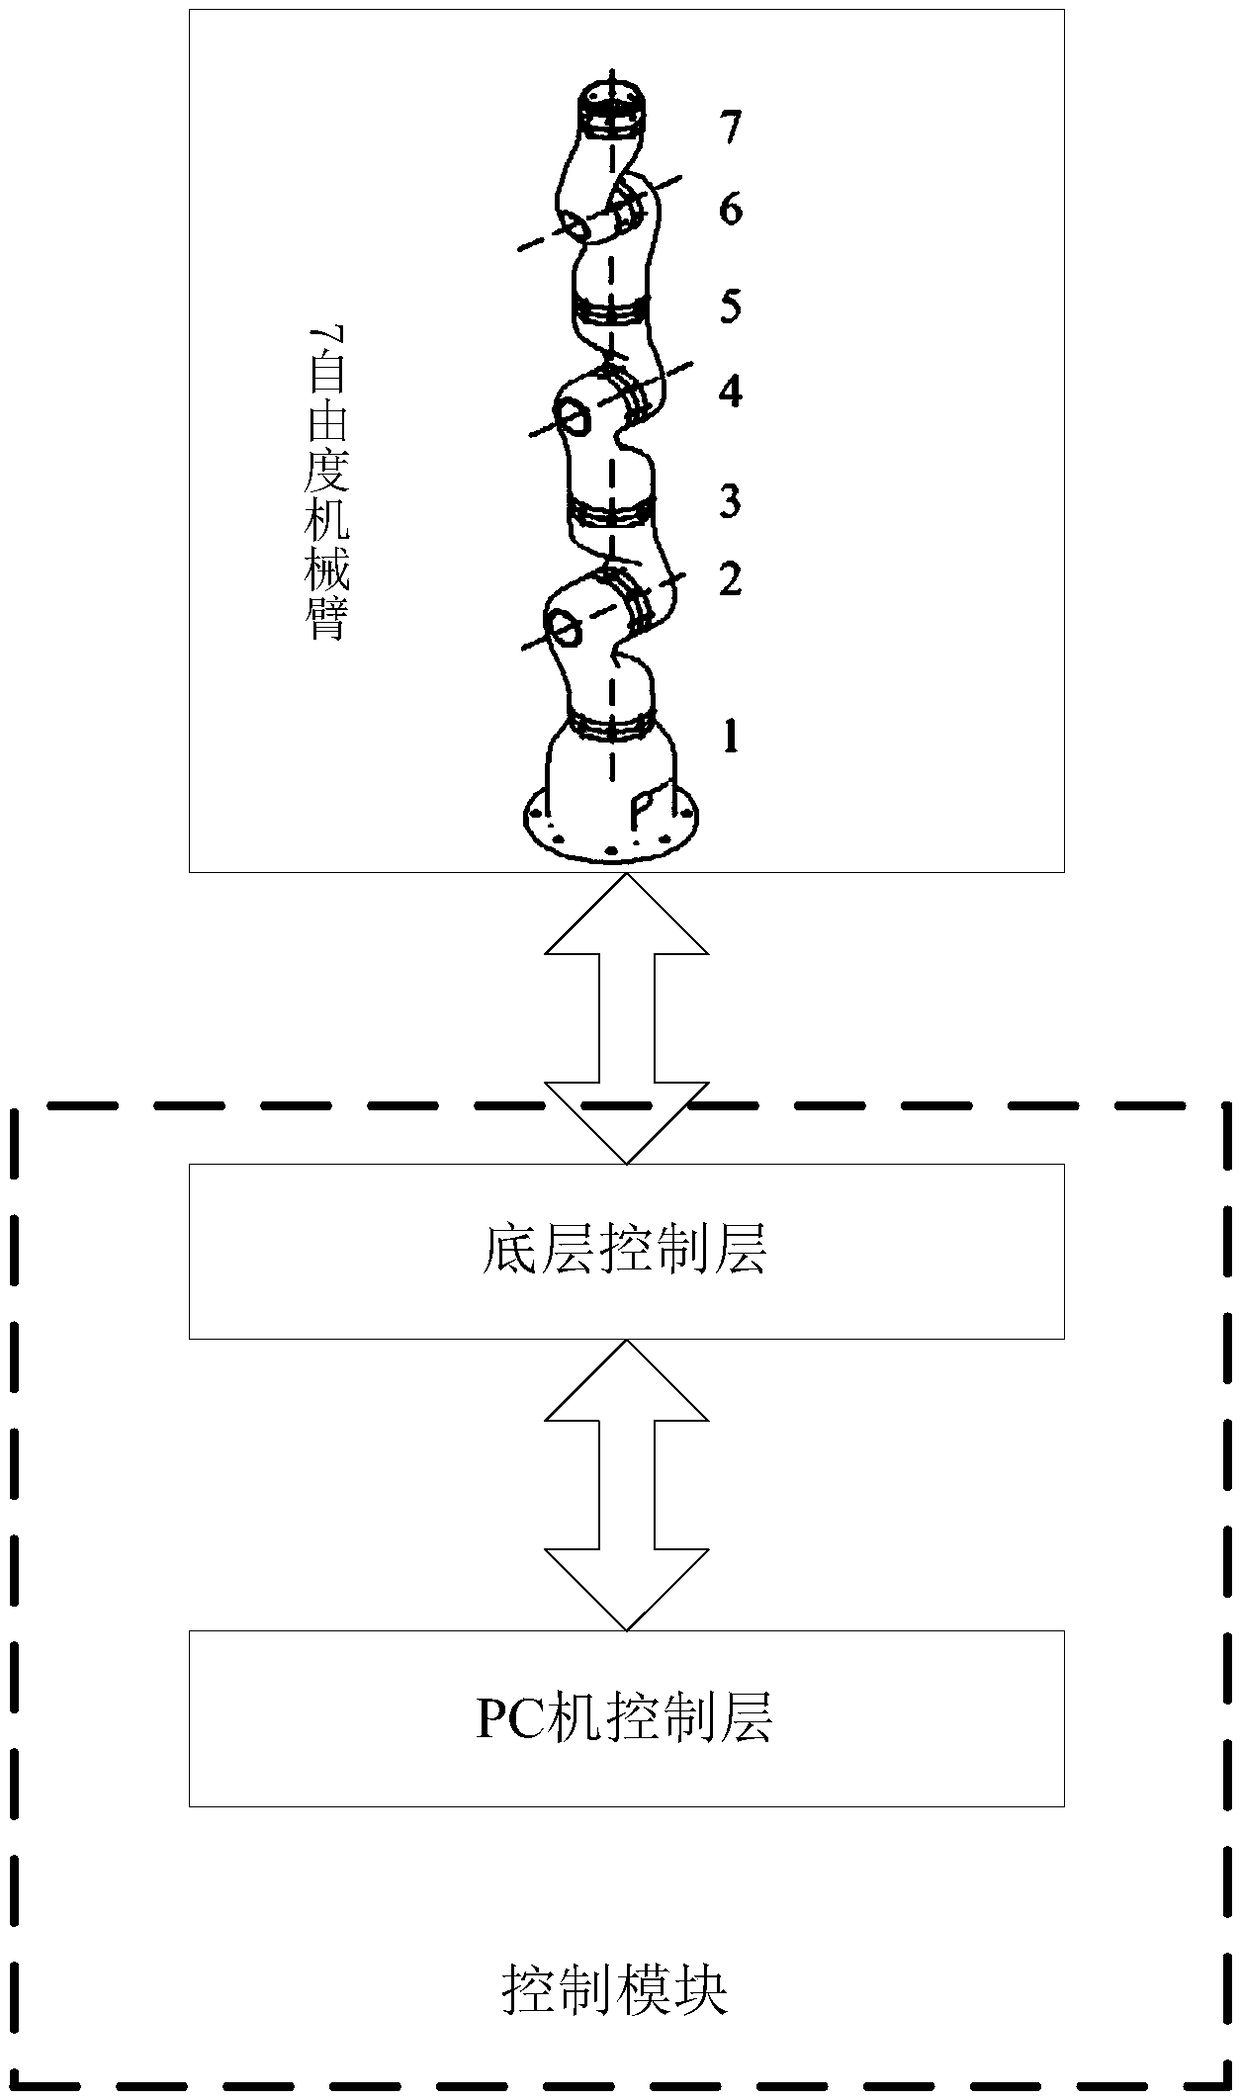 Seven-freedom-degree mechanical arm control method and system based on analytical solution